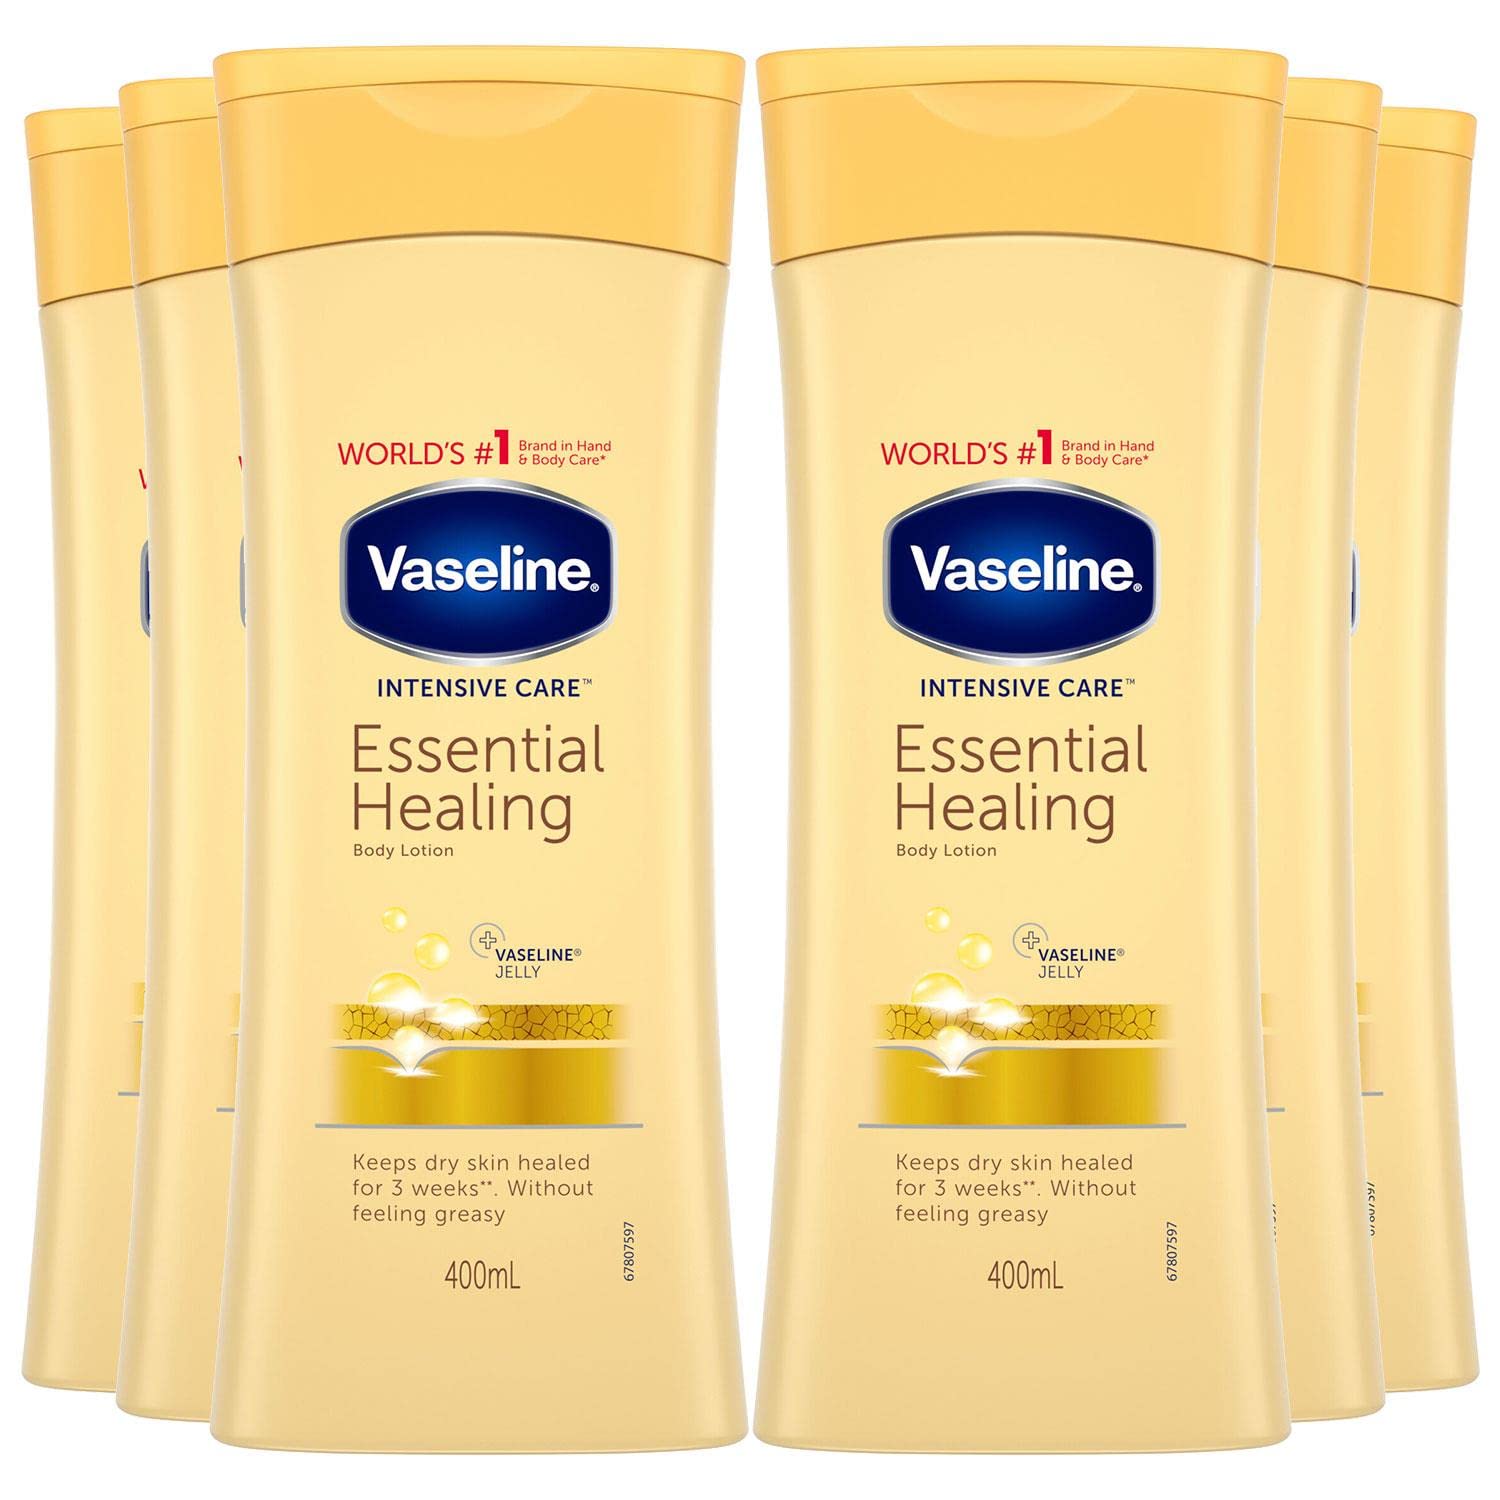 x6 Vaseline Intensive Care Essential Healing Dry Skin Body Lotion 400ml